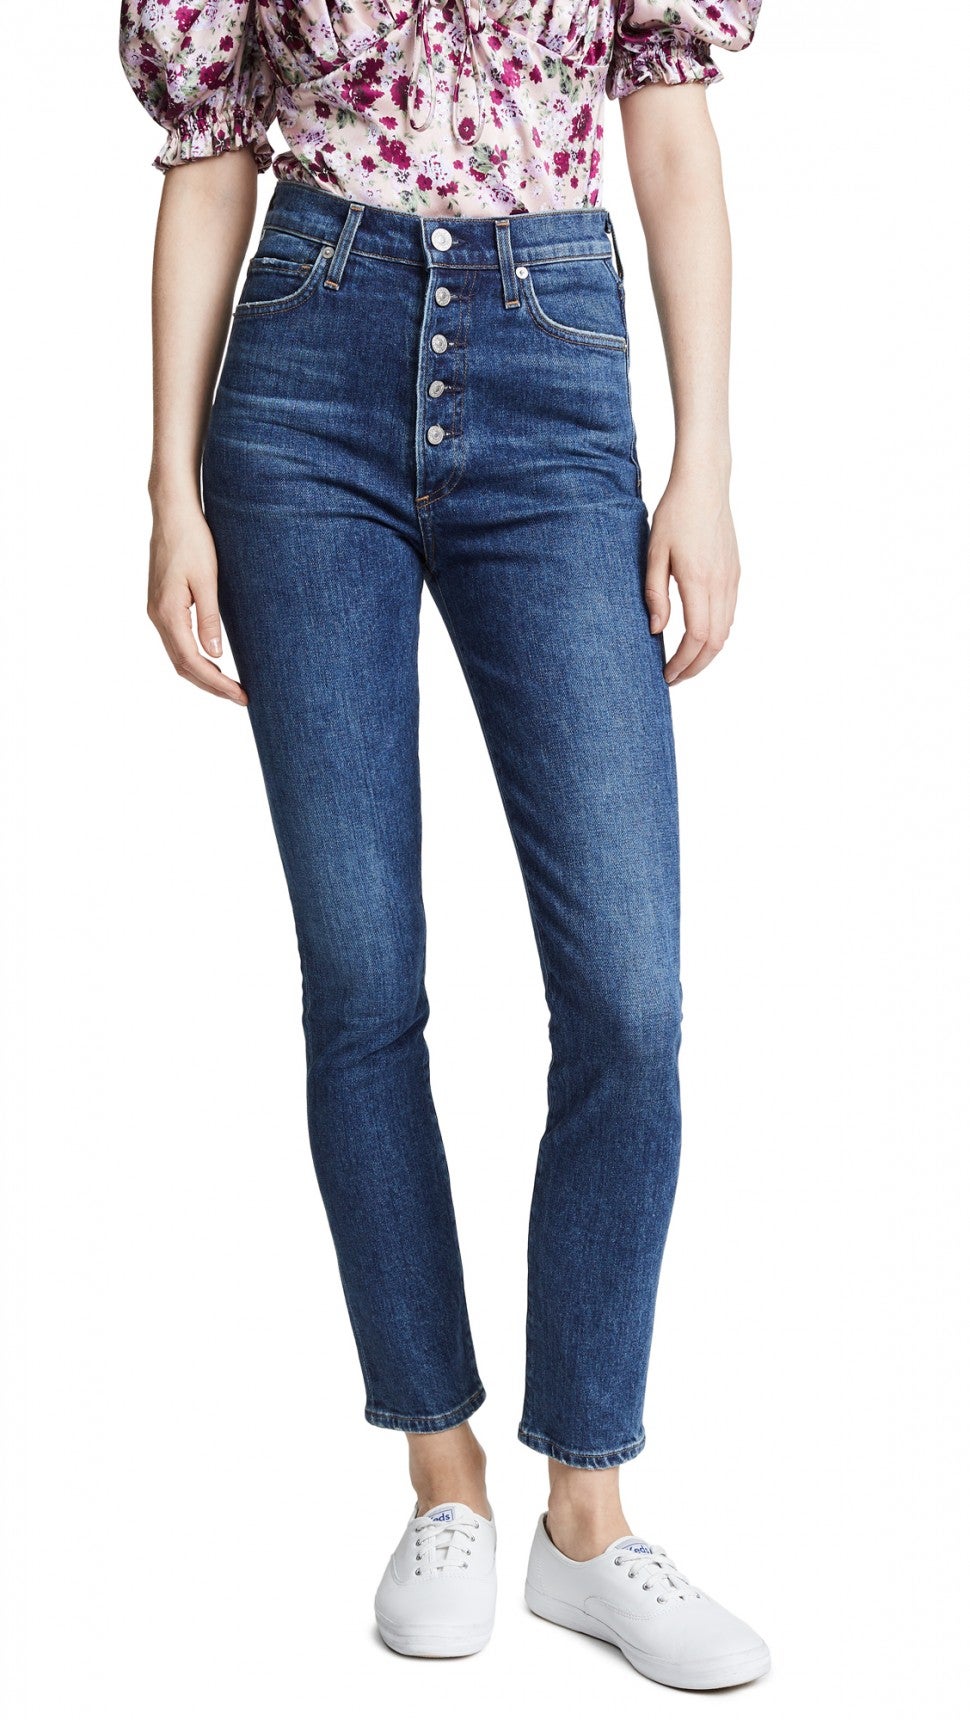 Citizens of Humanity exposed button fly skinny jeans